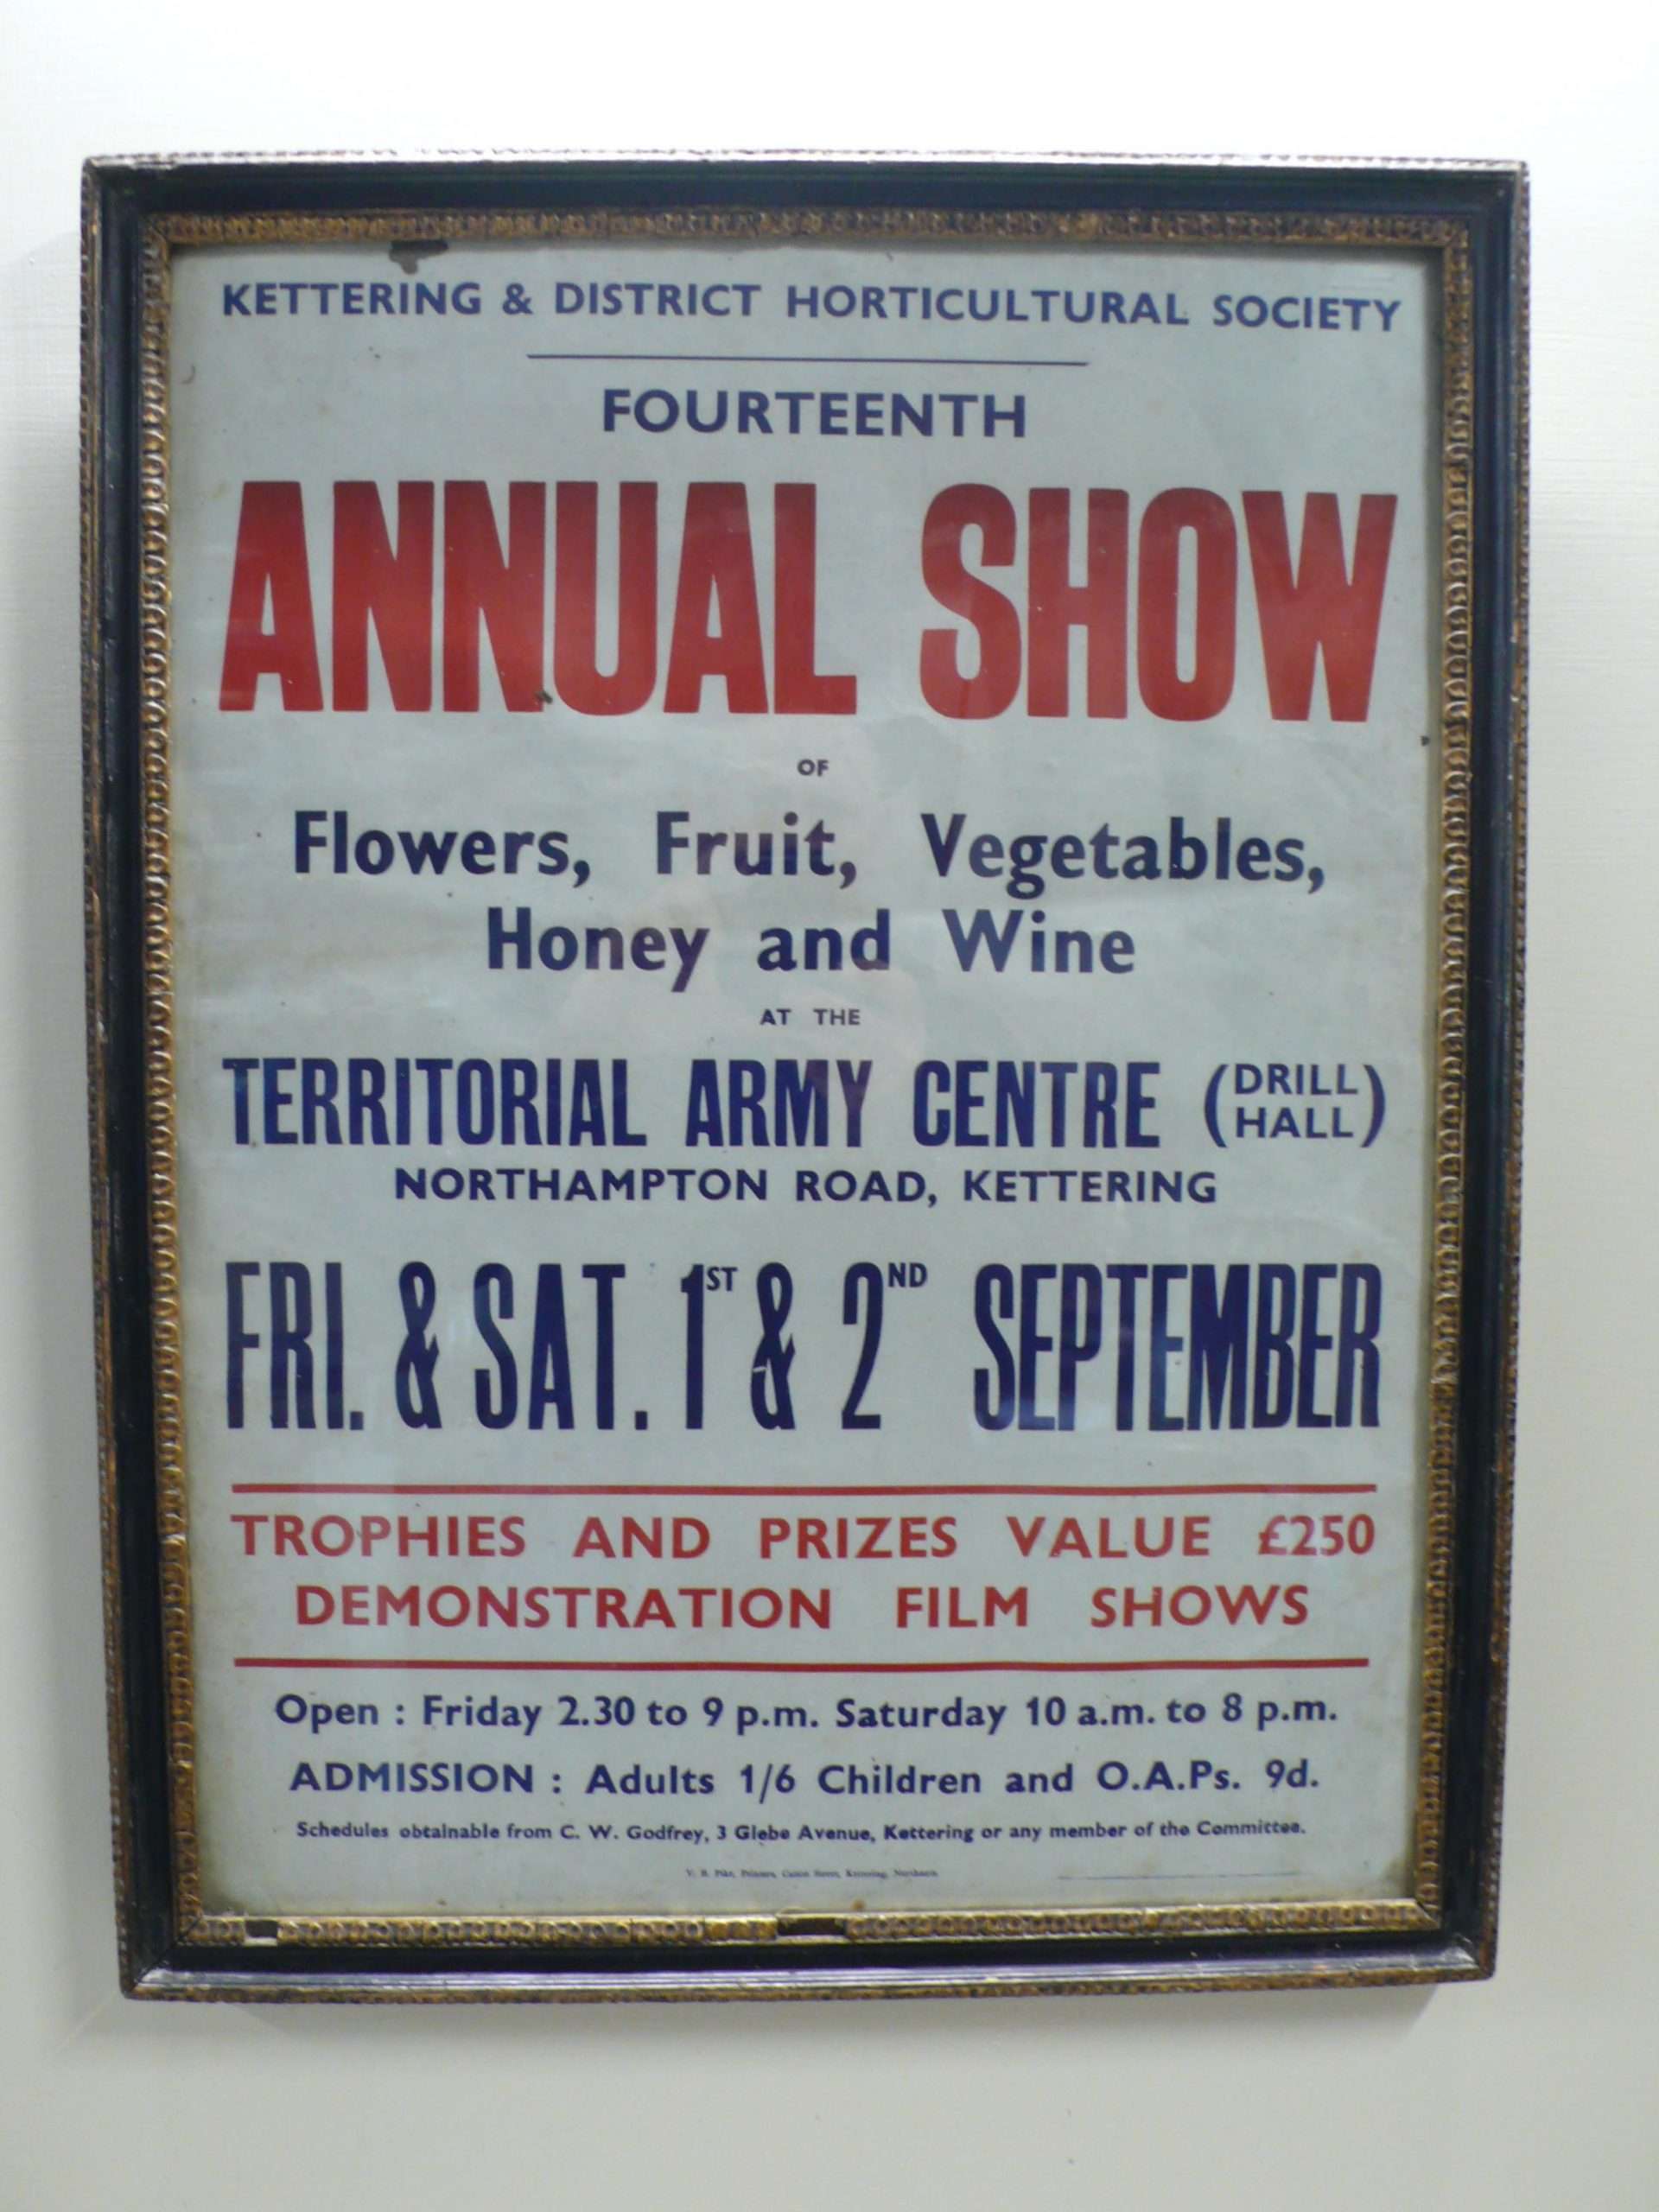 Kettering Annual Flower Show Poster